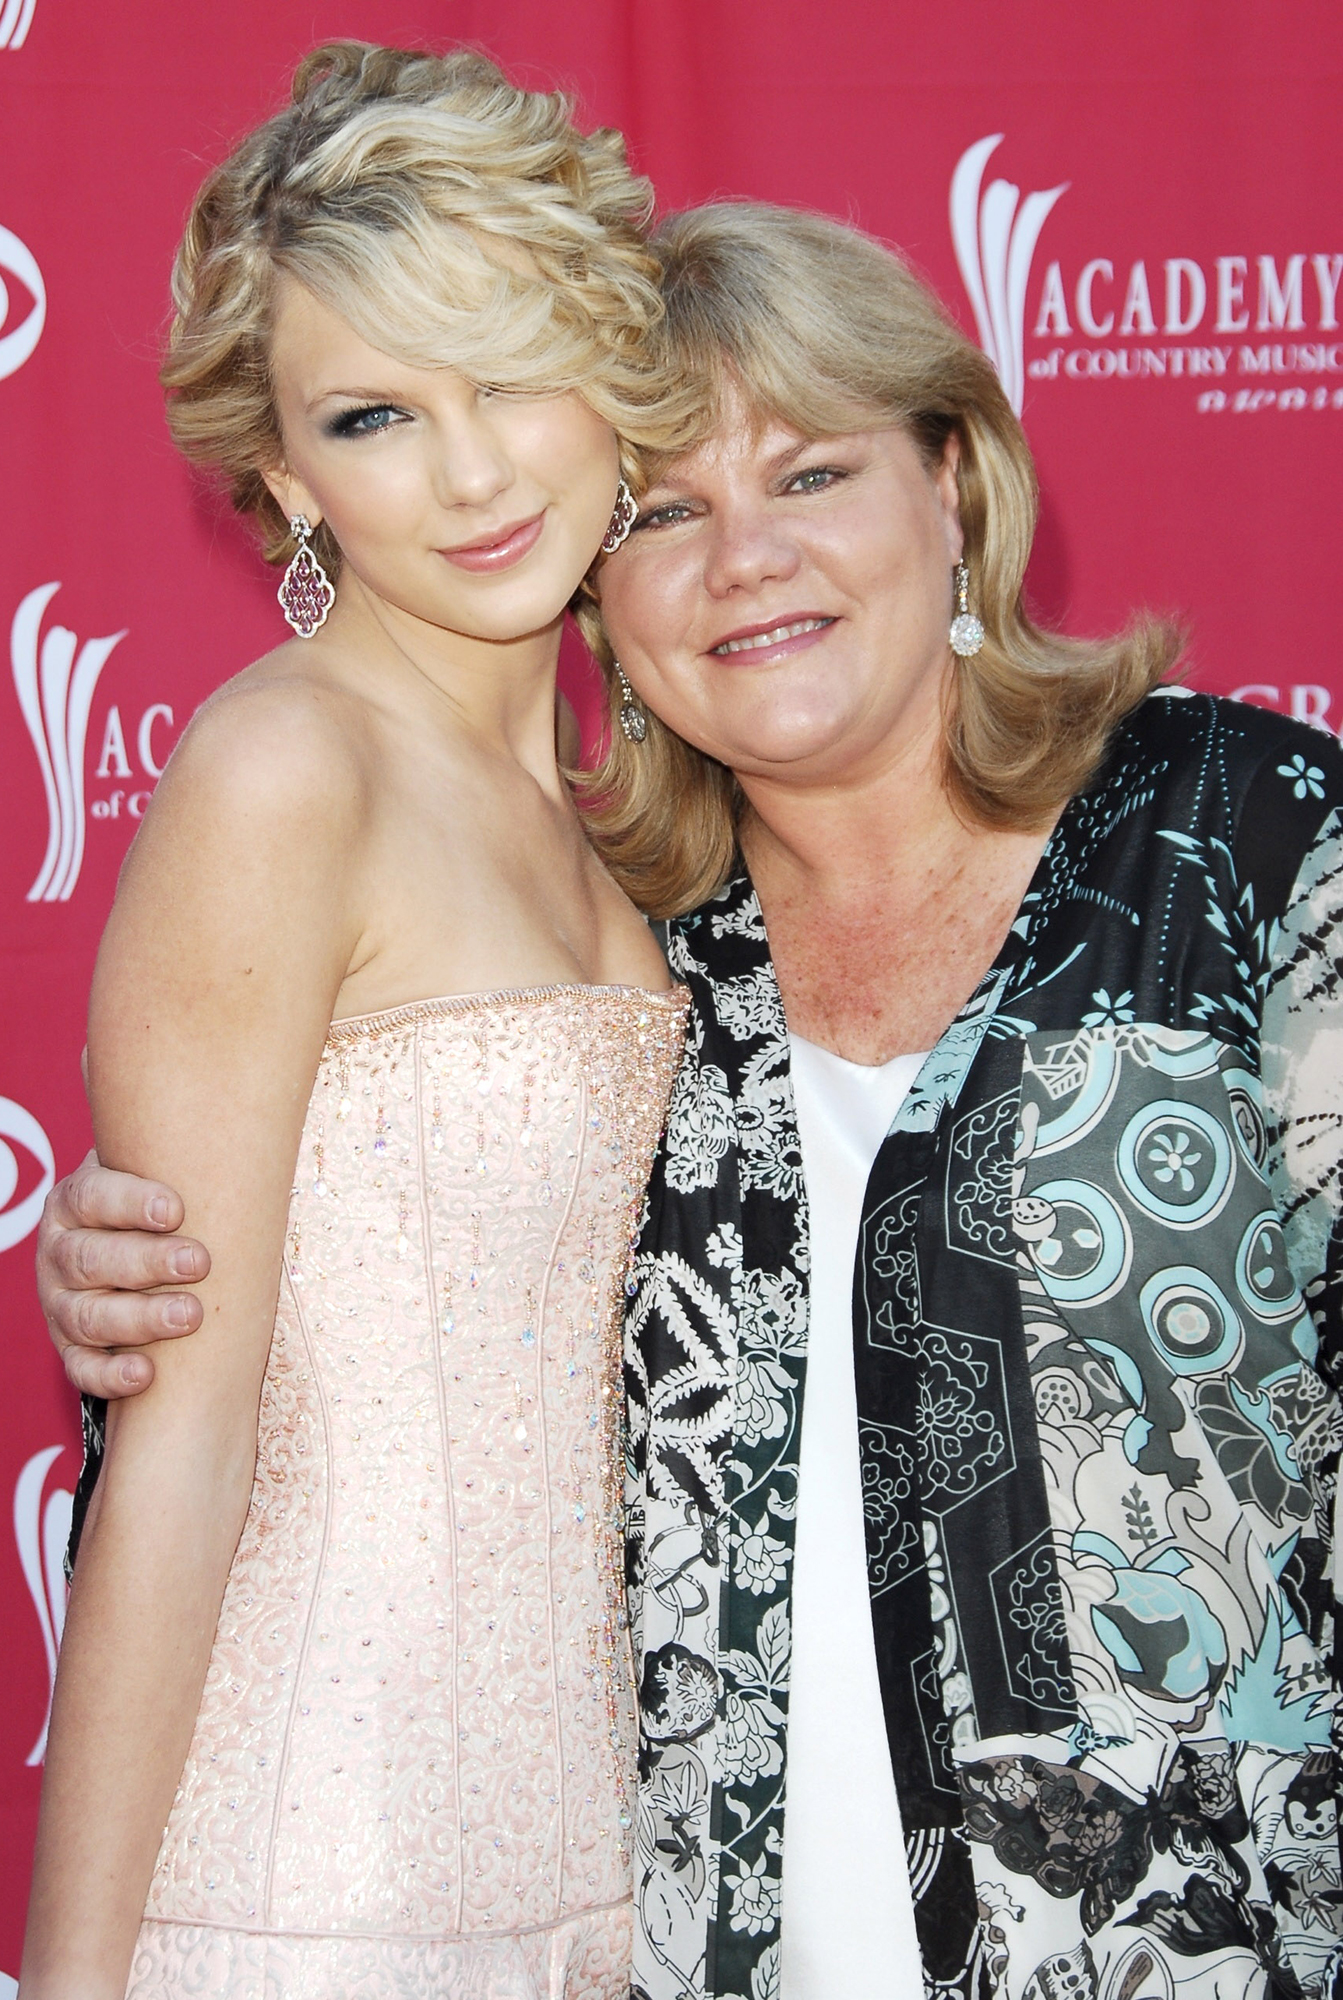 Taylor Swift Reveals Her Mother Was Diagnosed With a Brain Tumor Amid Breast Cancer Battle